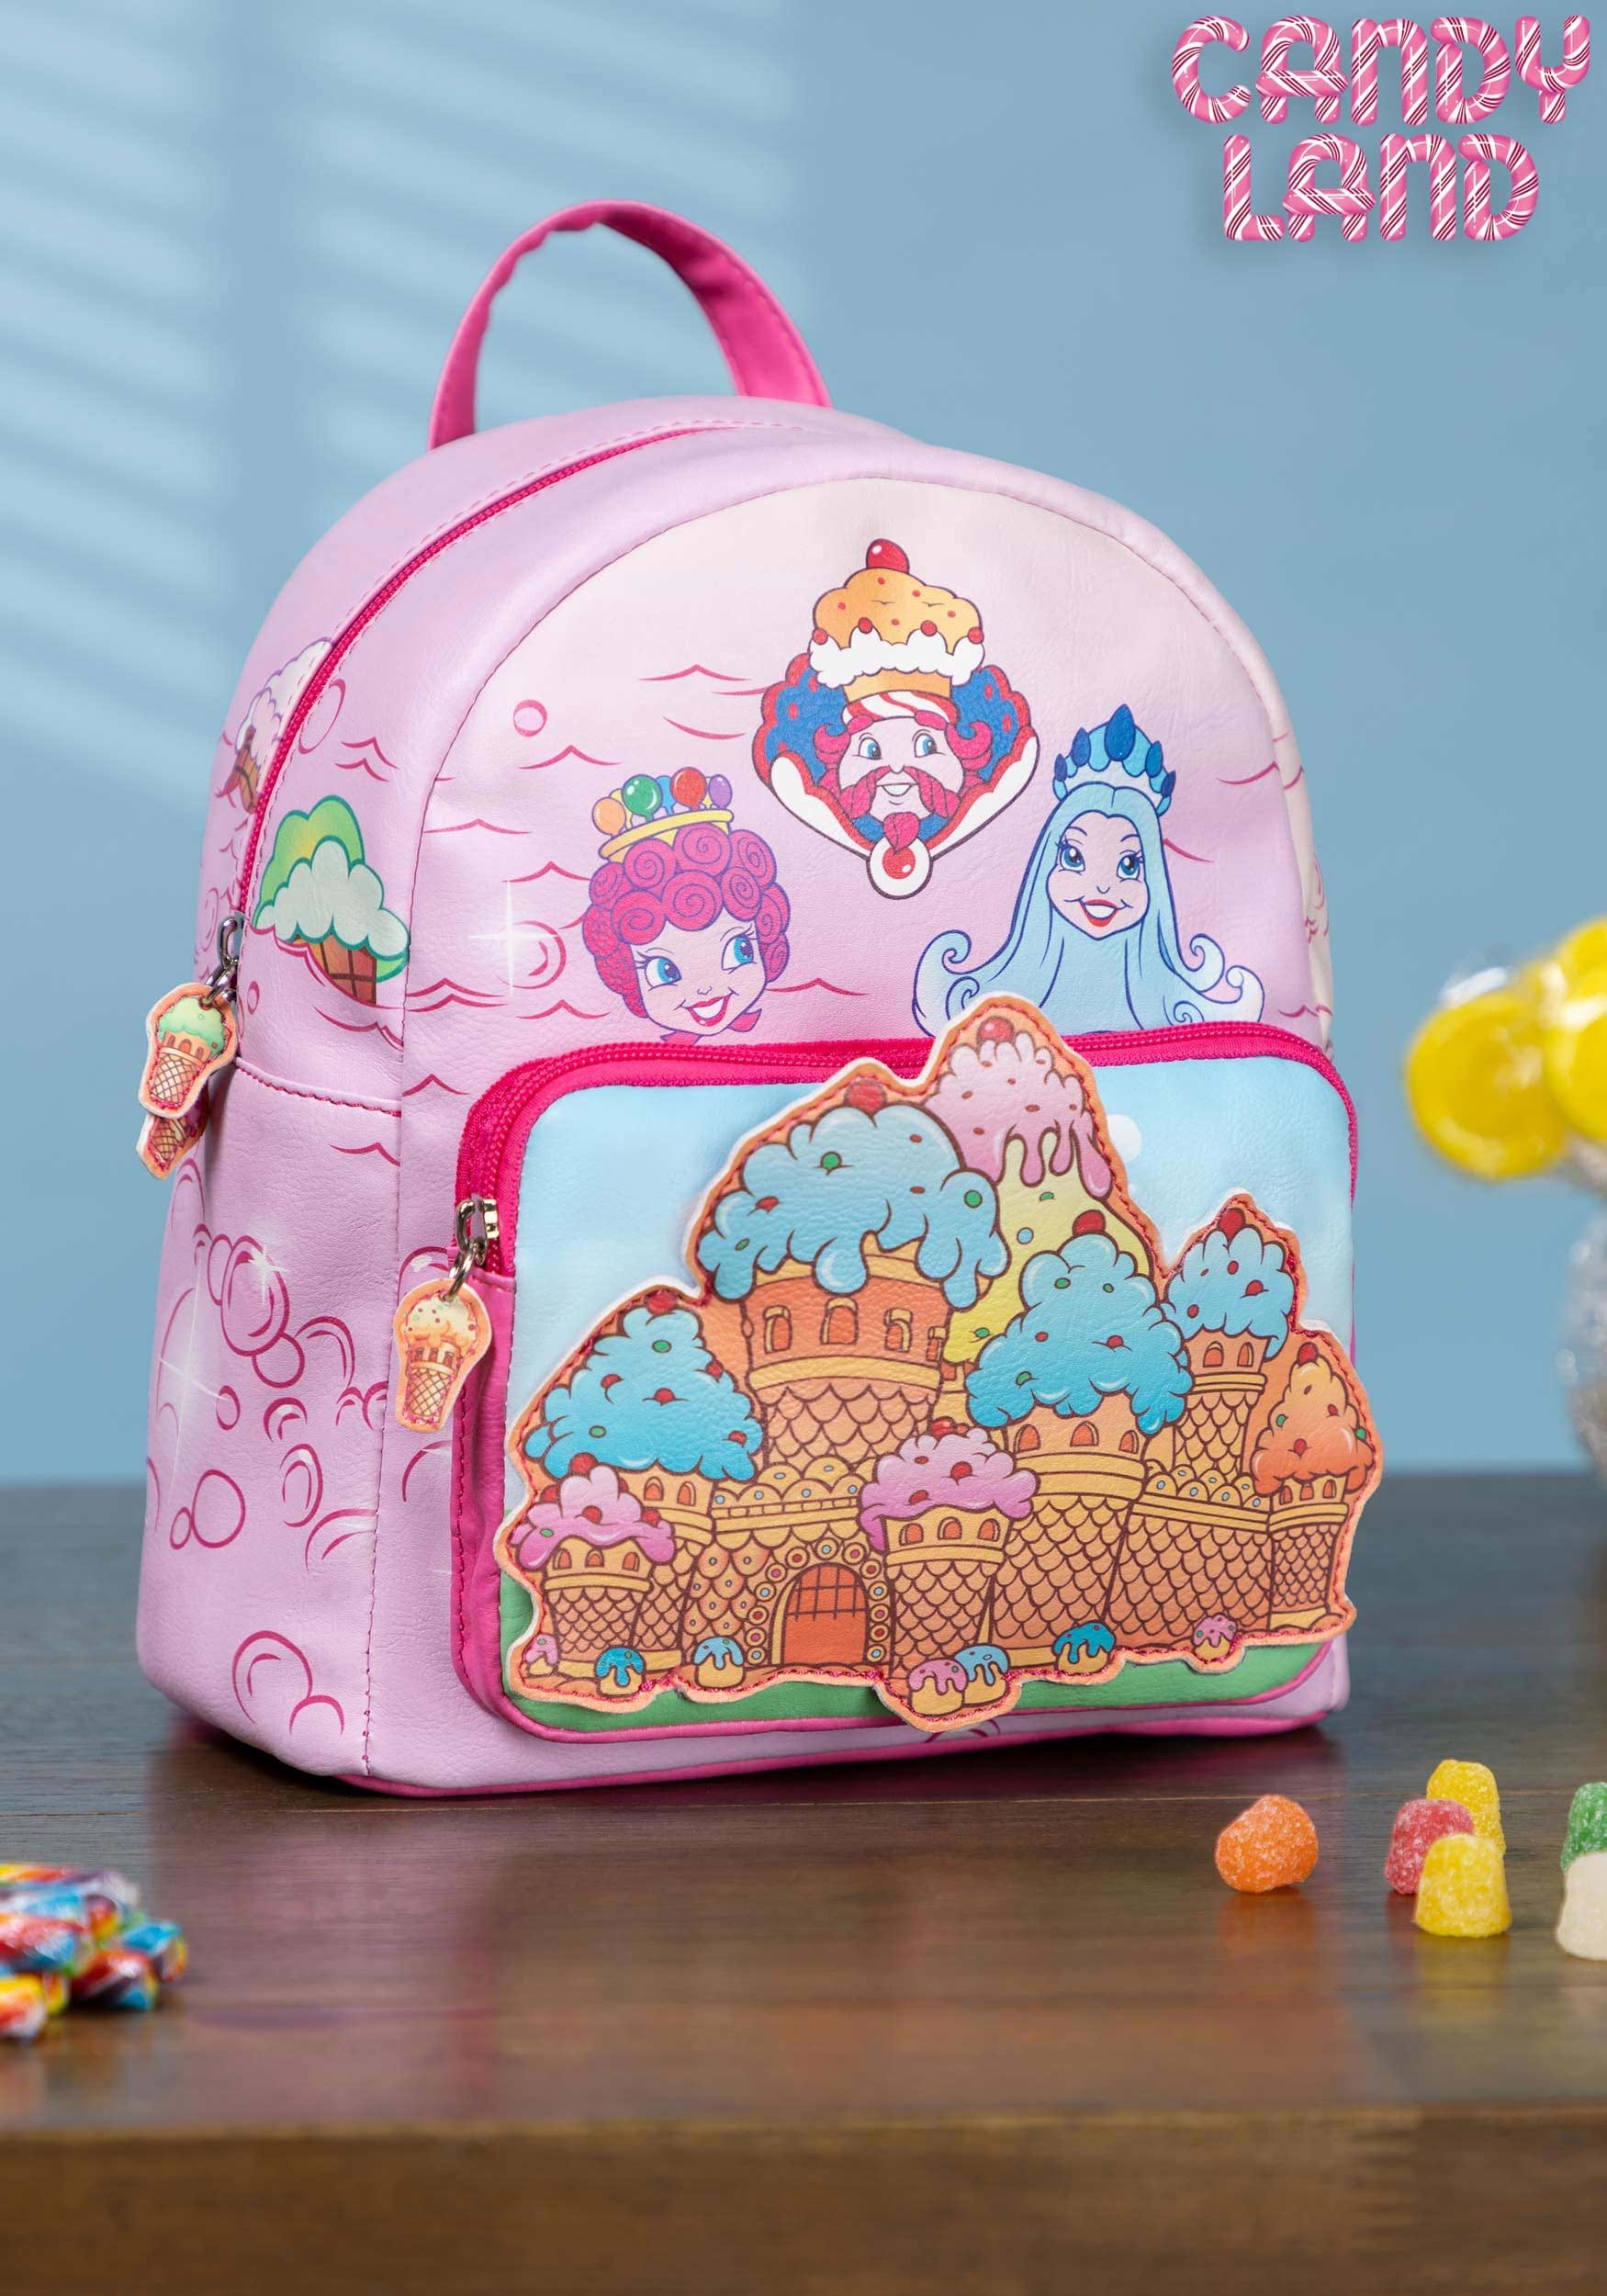 King Kandy's Candy Land Castle Mini Backpack